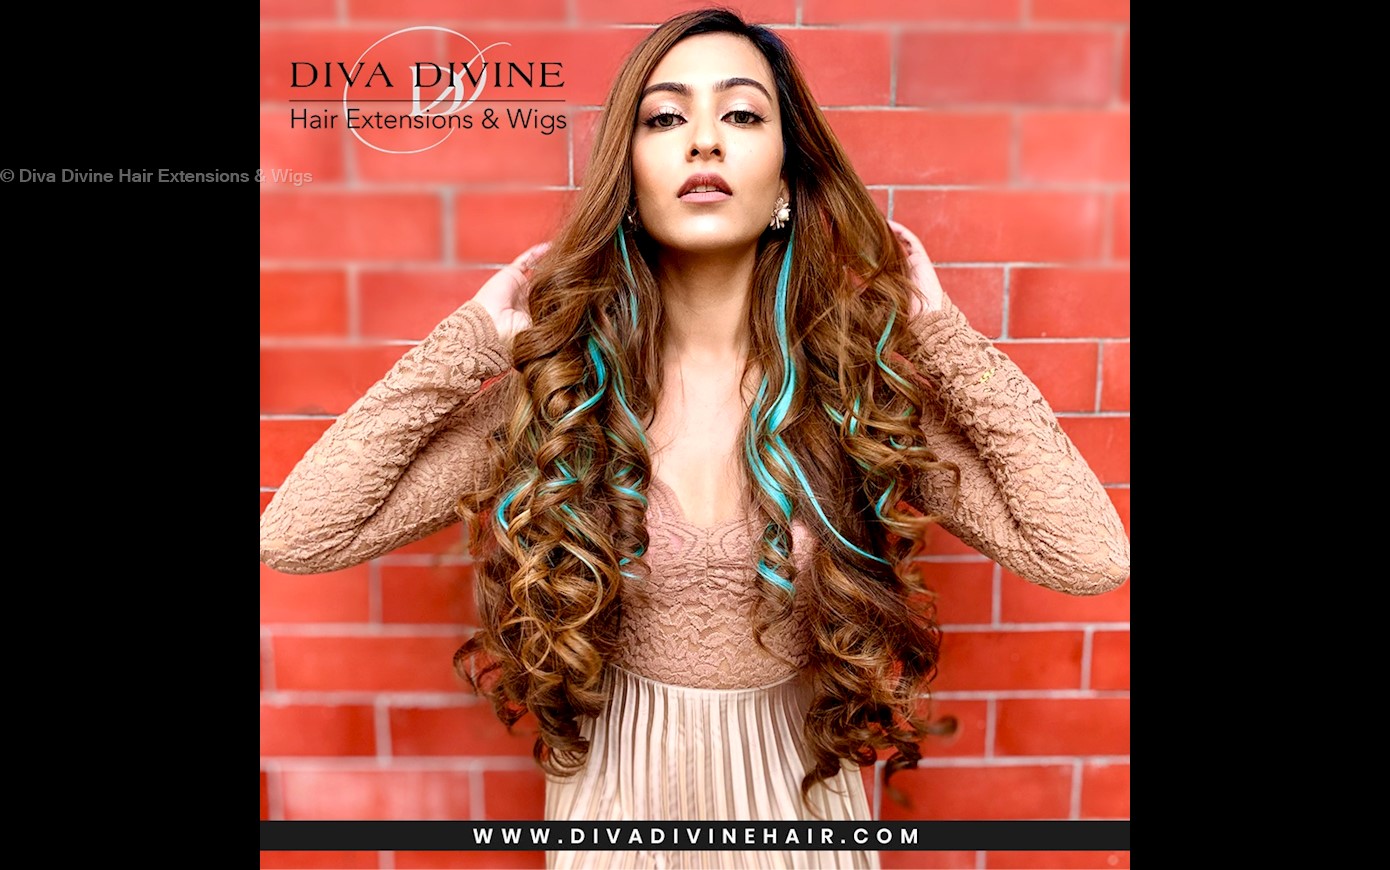 Best places to buy wigs hair pieces and hair extensions online in India   Vogue India